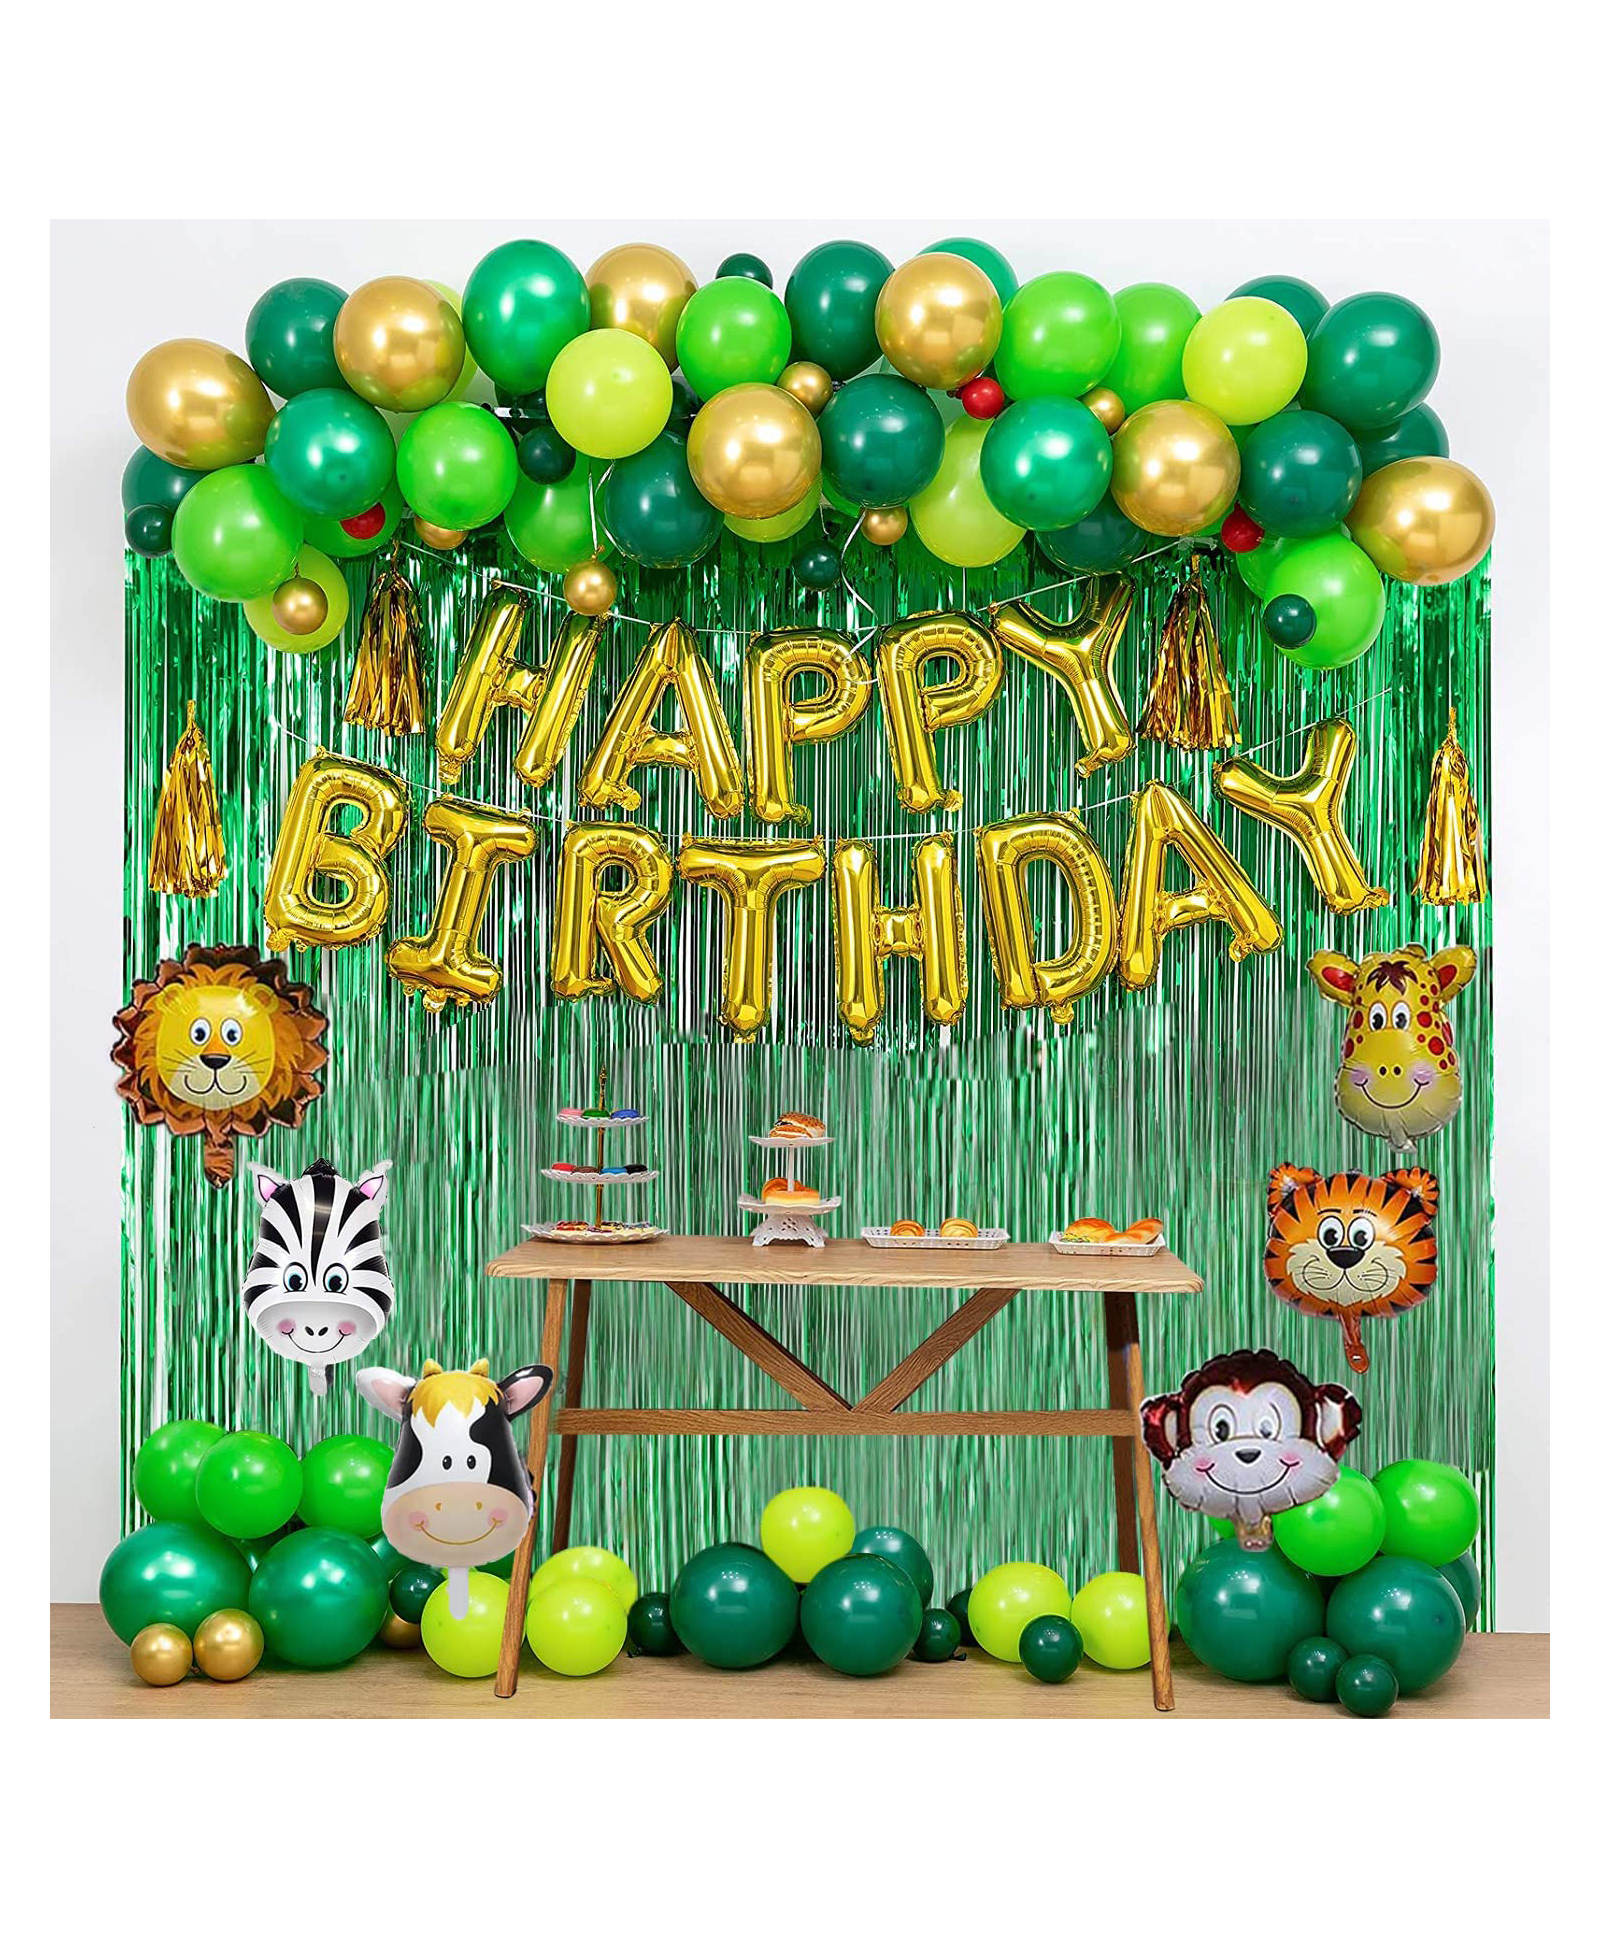 JOHRA (Pack of 92) Happy Birthday decoration / Happy birthday foil balloon  / Jungle theme birthday decoration / Animal theme birthday party decorations  Online in India, Buy at Best Price from  - 11271493